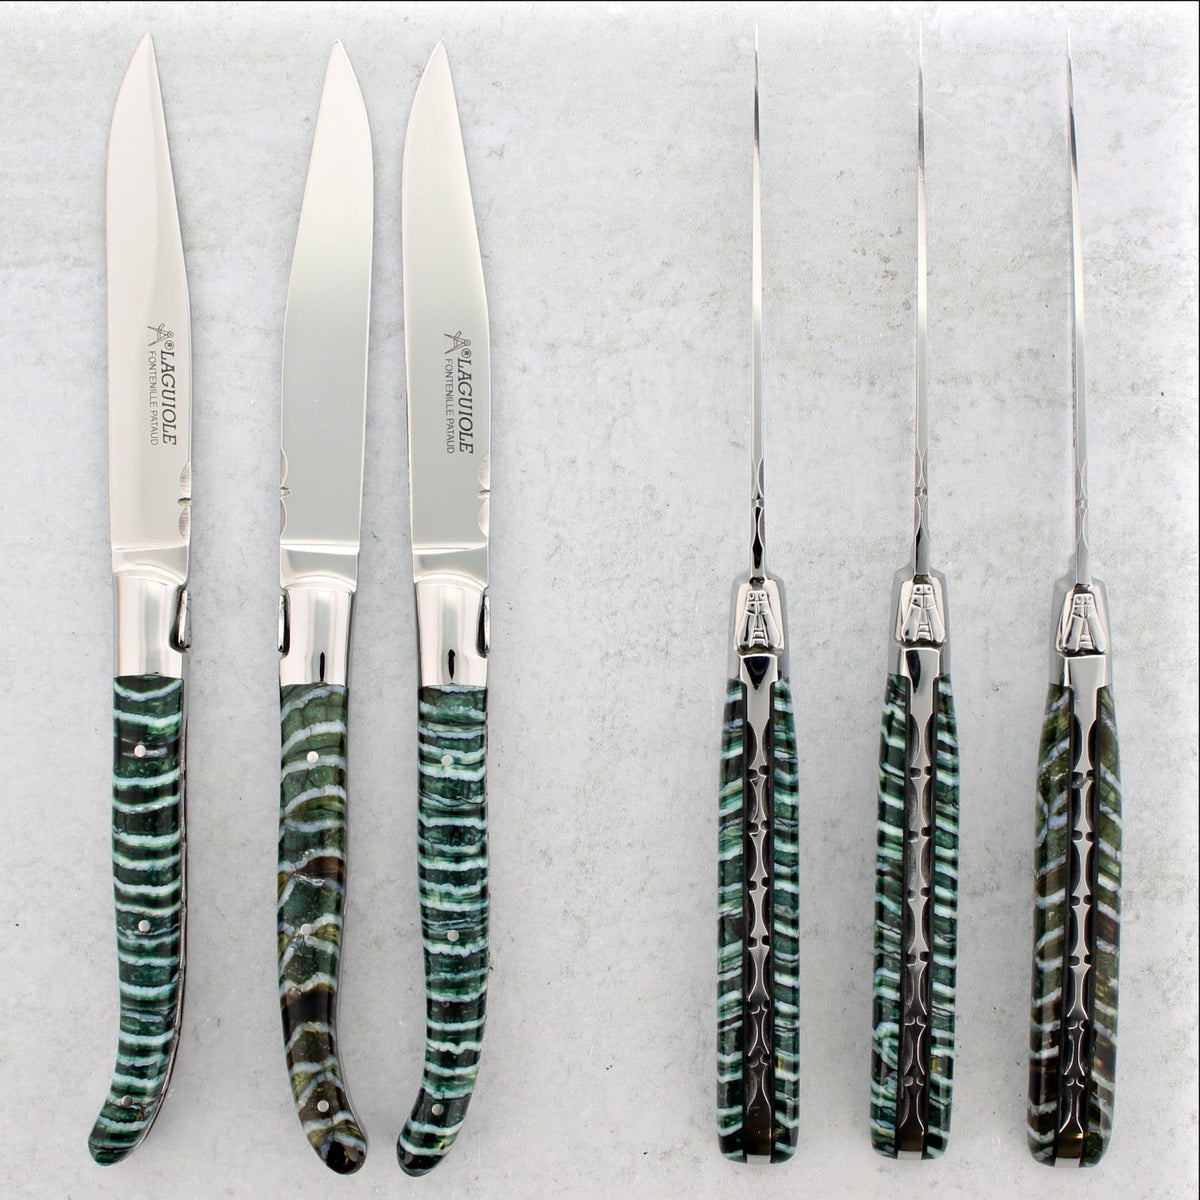 Laguiole Forged Steak Knives Fossilized Woolly Mammoth Tooth - Set of 6 - Emerald